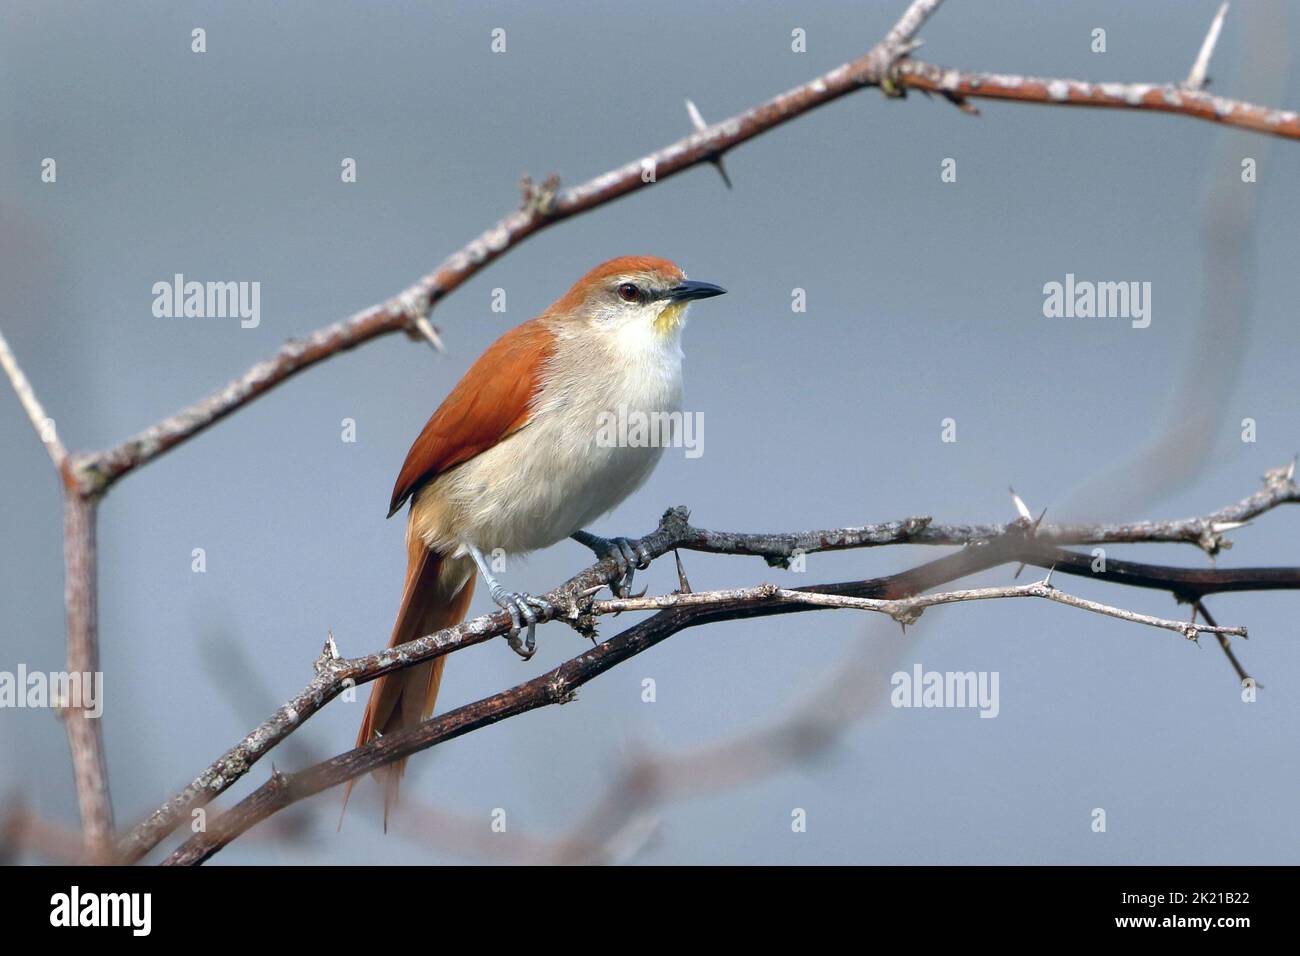 Yellow-chinned Spinetail (Certhiaxis cinnamomeus) perched on a dry branch on a bluish gray background Stock Photo